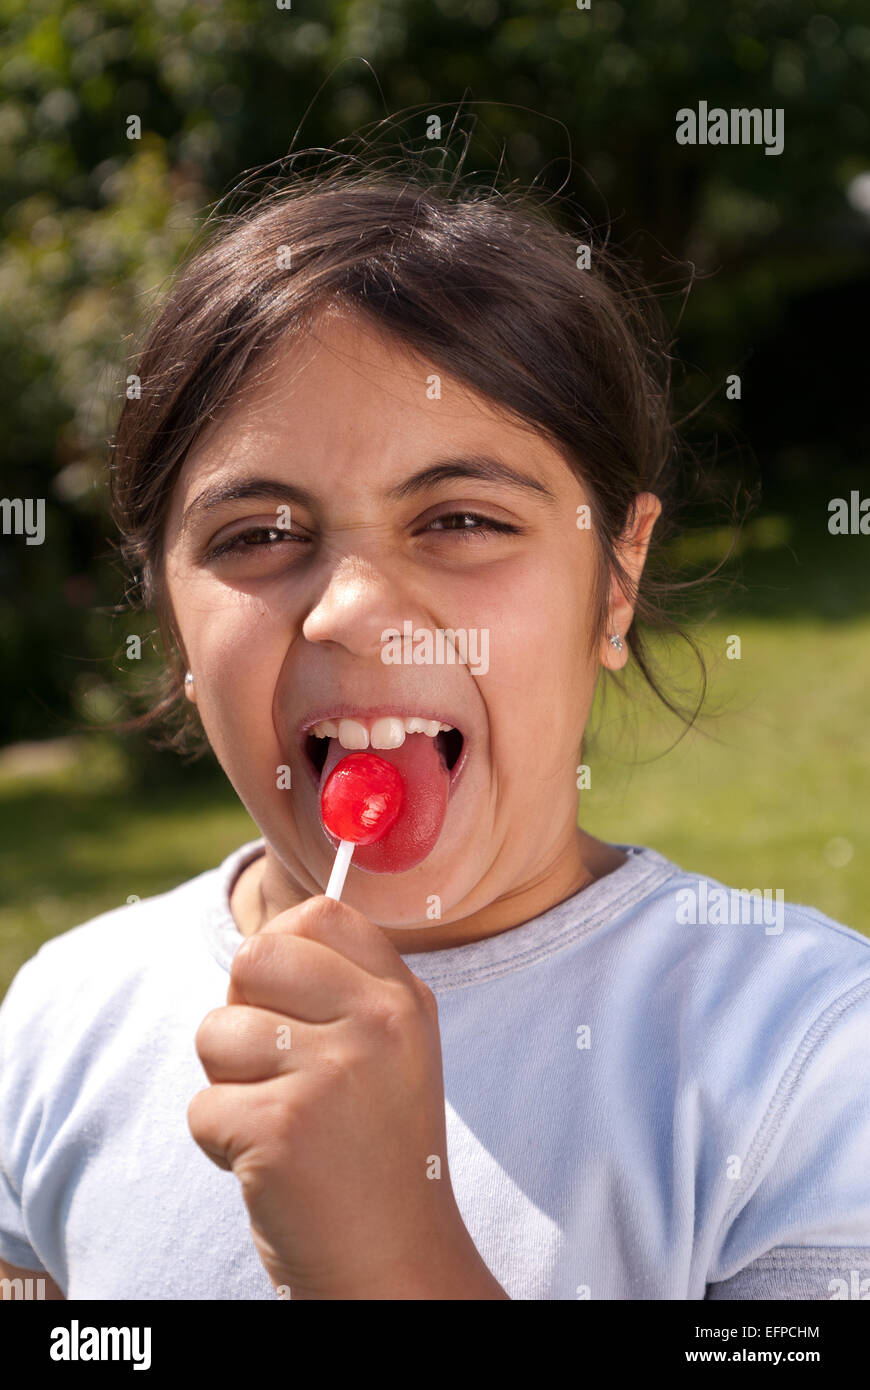 Happy child young girl outside sucking lollipop sweet on a paper handle need to look after teeth due sugar Stock Photo